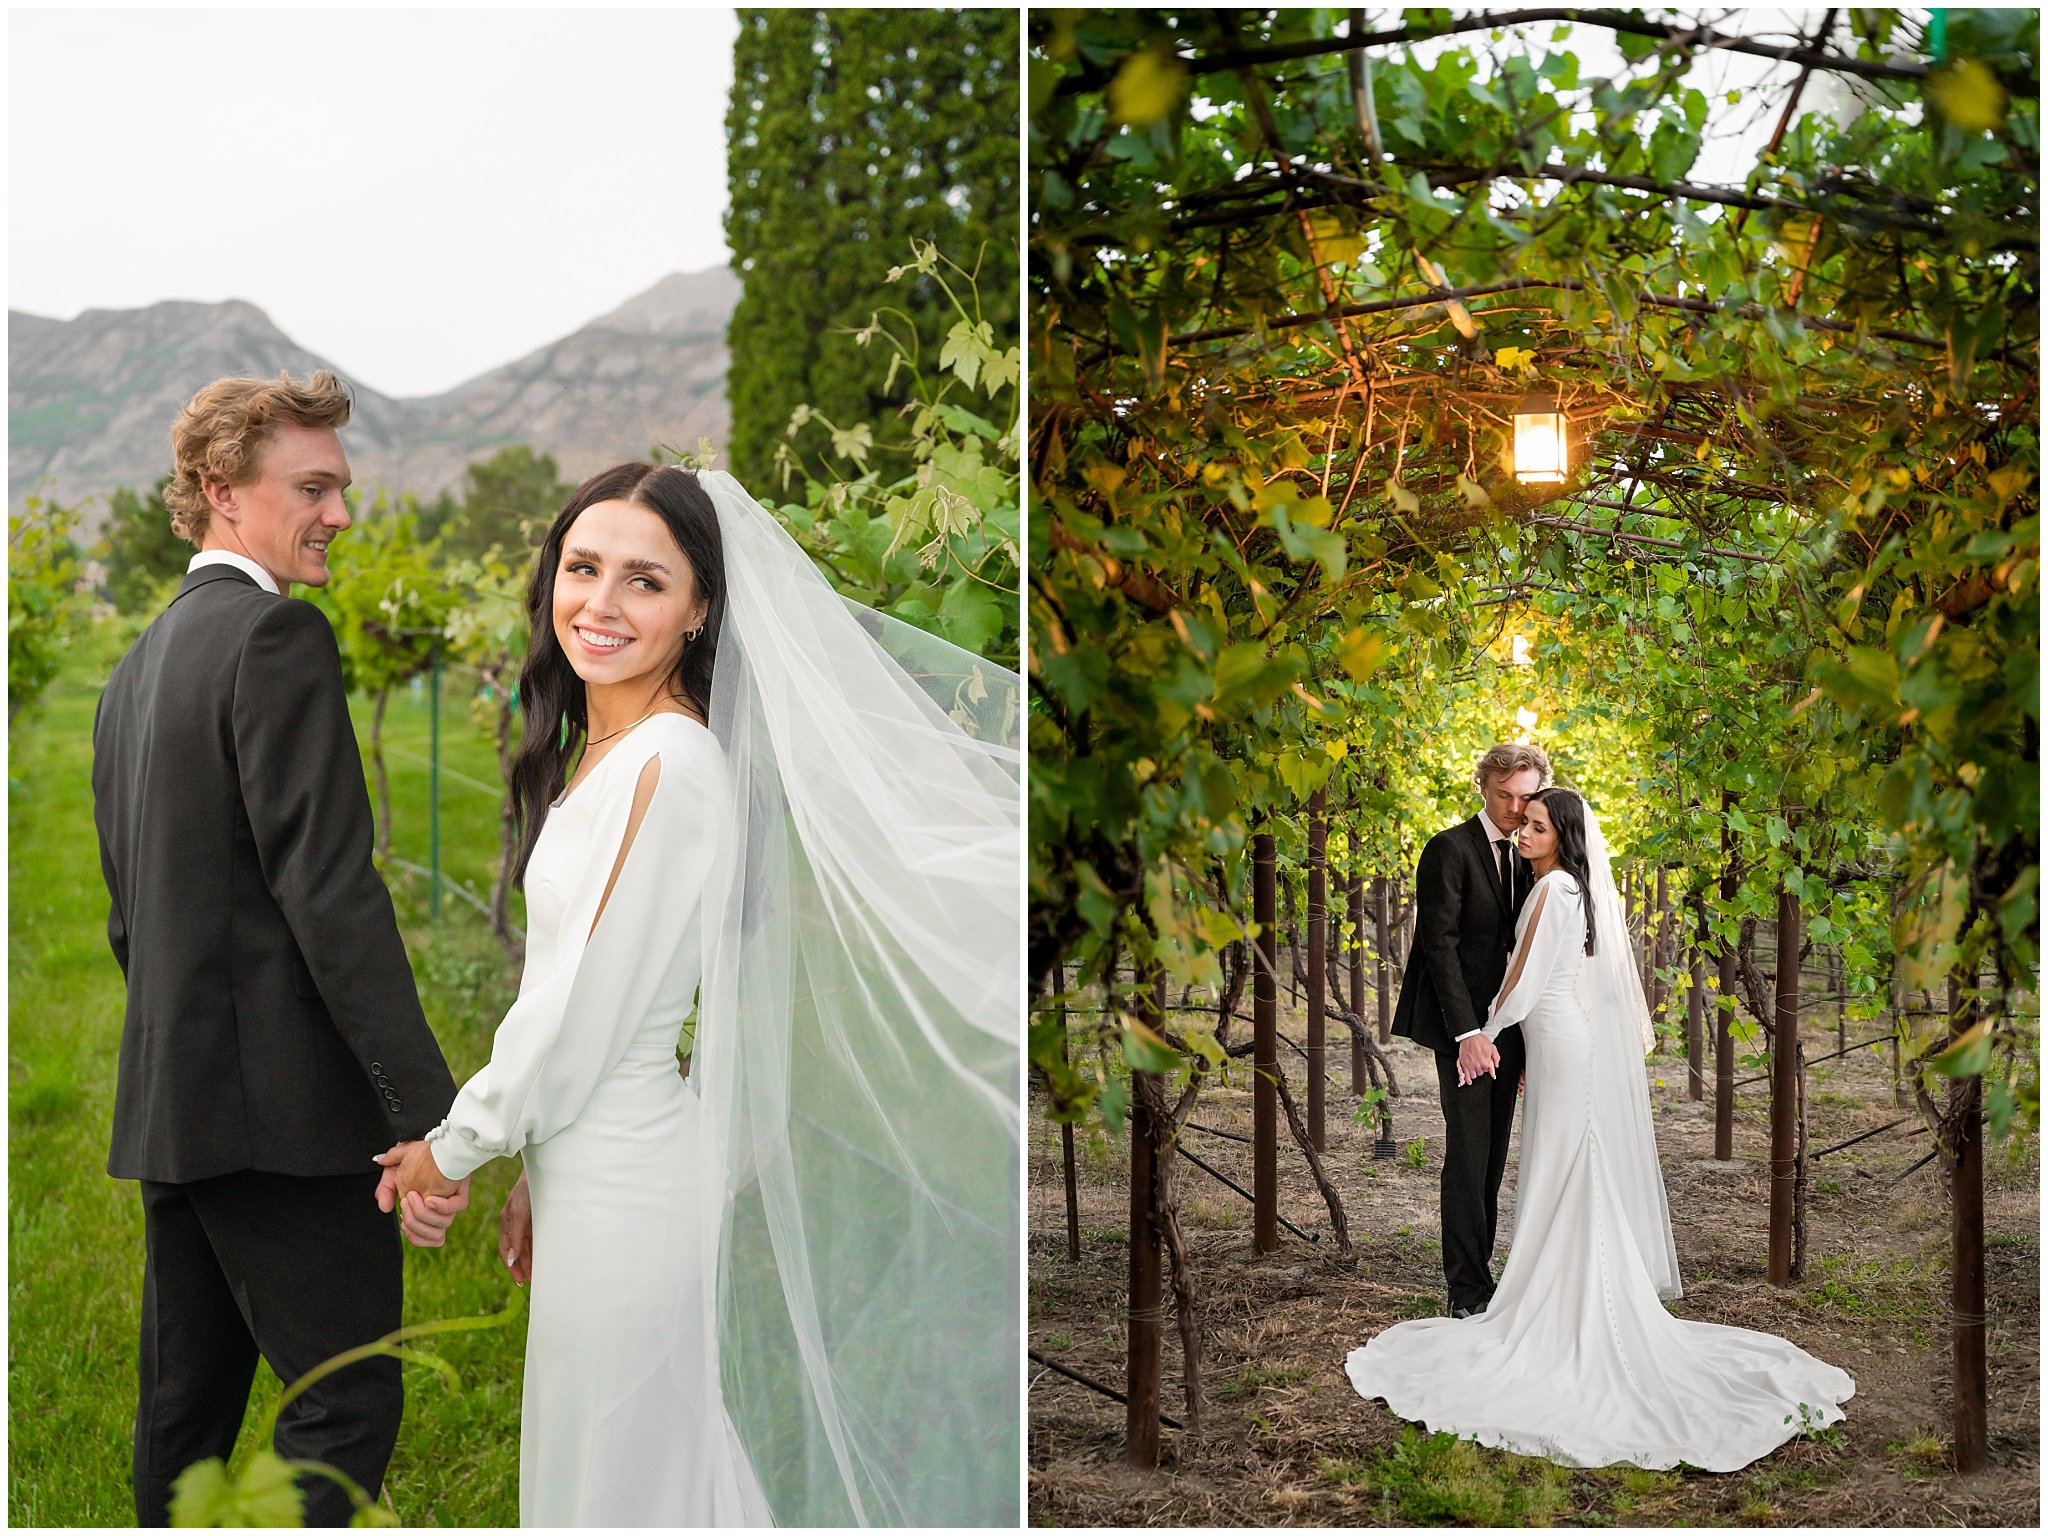 Bride and groom portraits in a vineyard outside of castle wedding venue with black and white and pink wedding colors | Draper Temple and Wadley Farms Summer Castle Wedding | Jessie and Dallin Photography